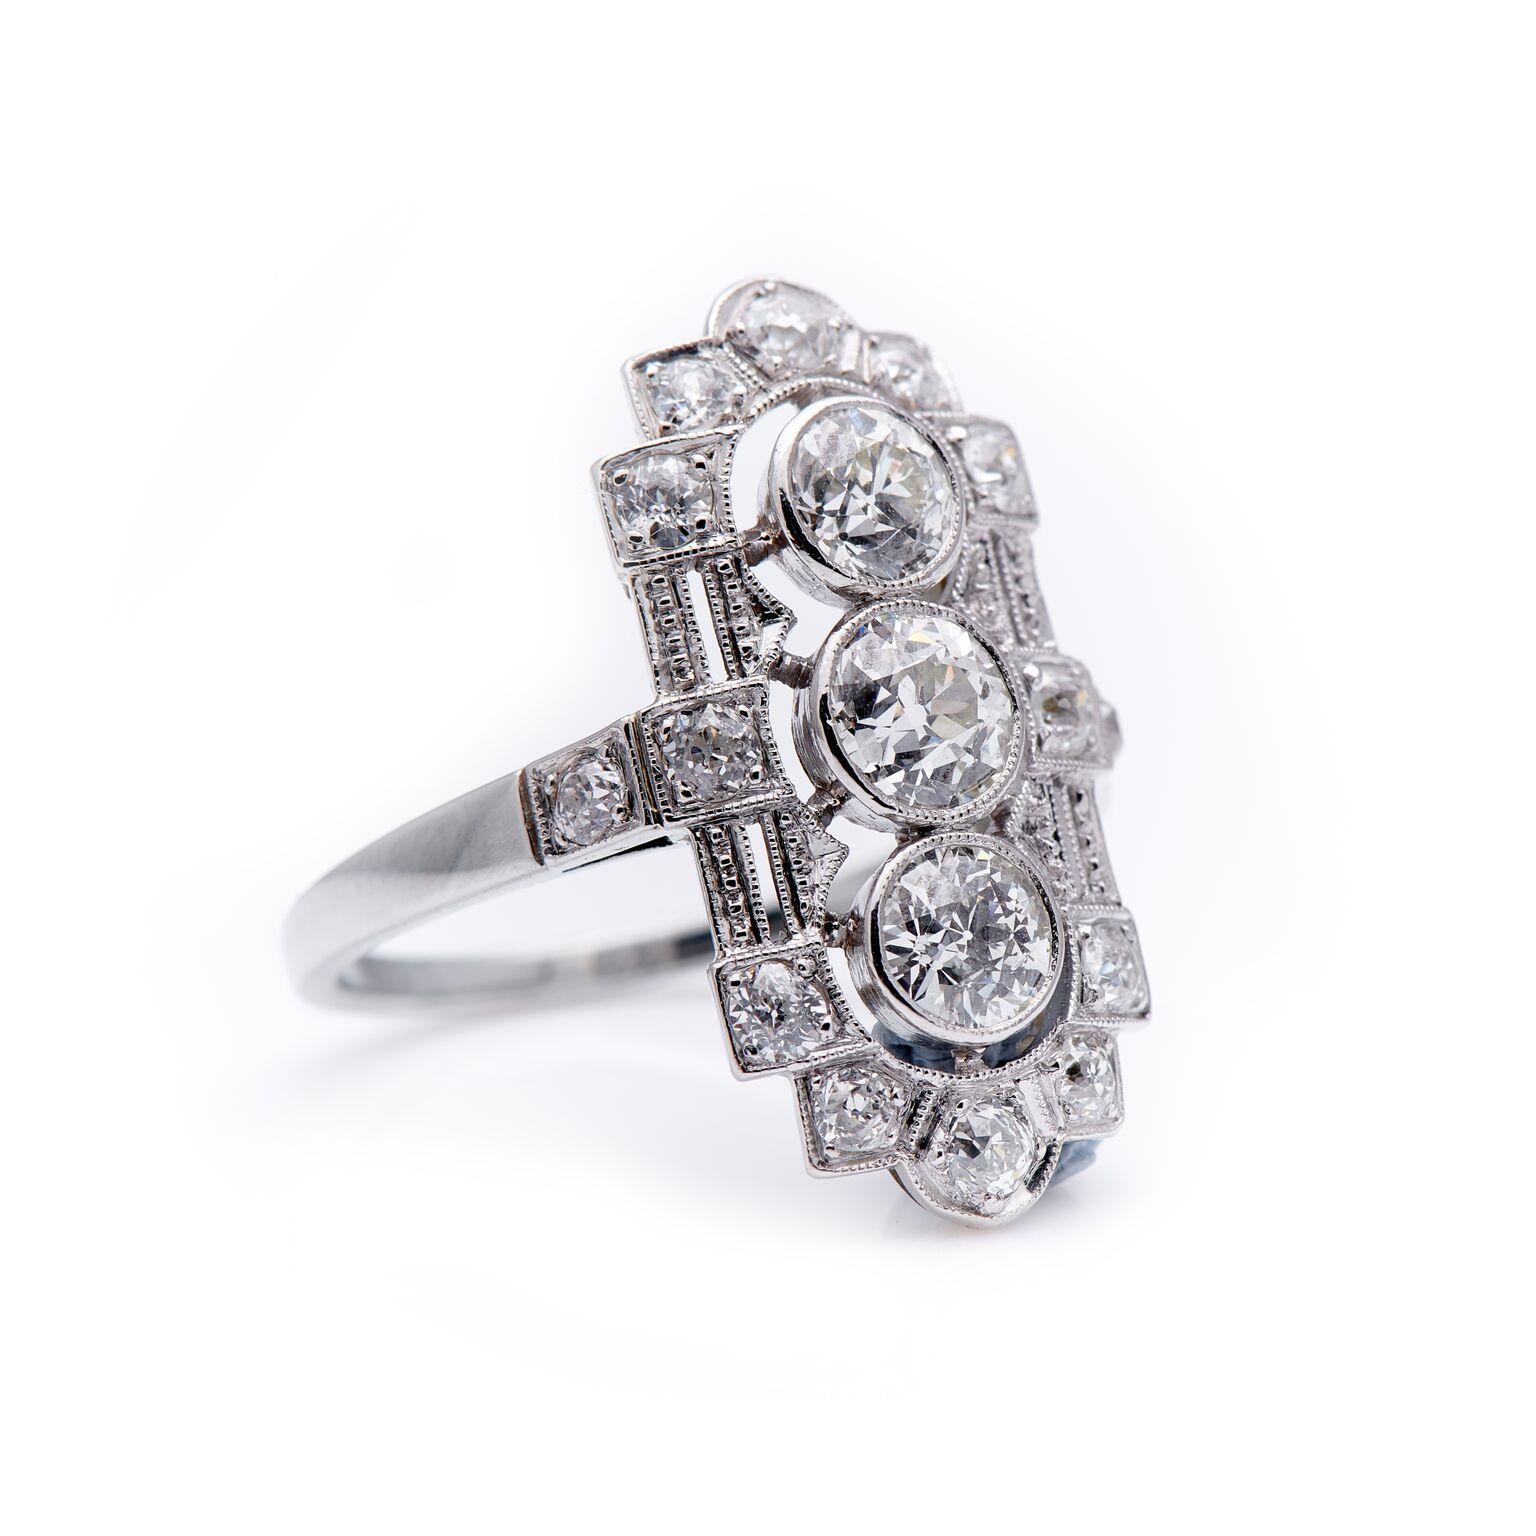 Art Deco, diamond plaque ring, circa 1920. A stunning arrangement of old-cut diamonds, set in white gold, to form this unquestionably Art Deco design. The three principle diamonds are set horizontally to trail and elongate the finger. Further